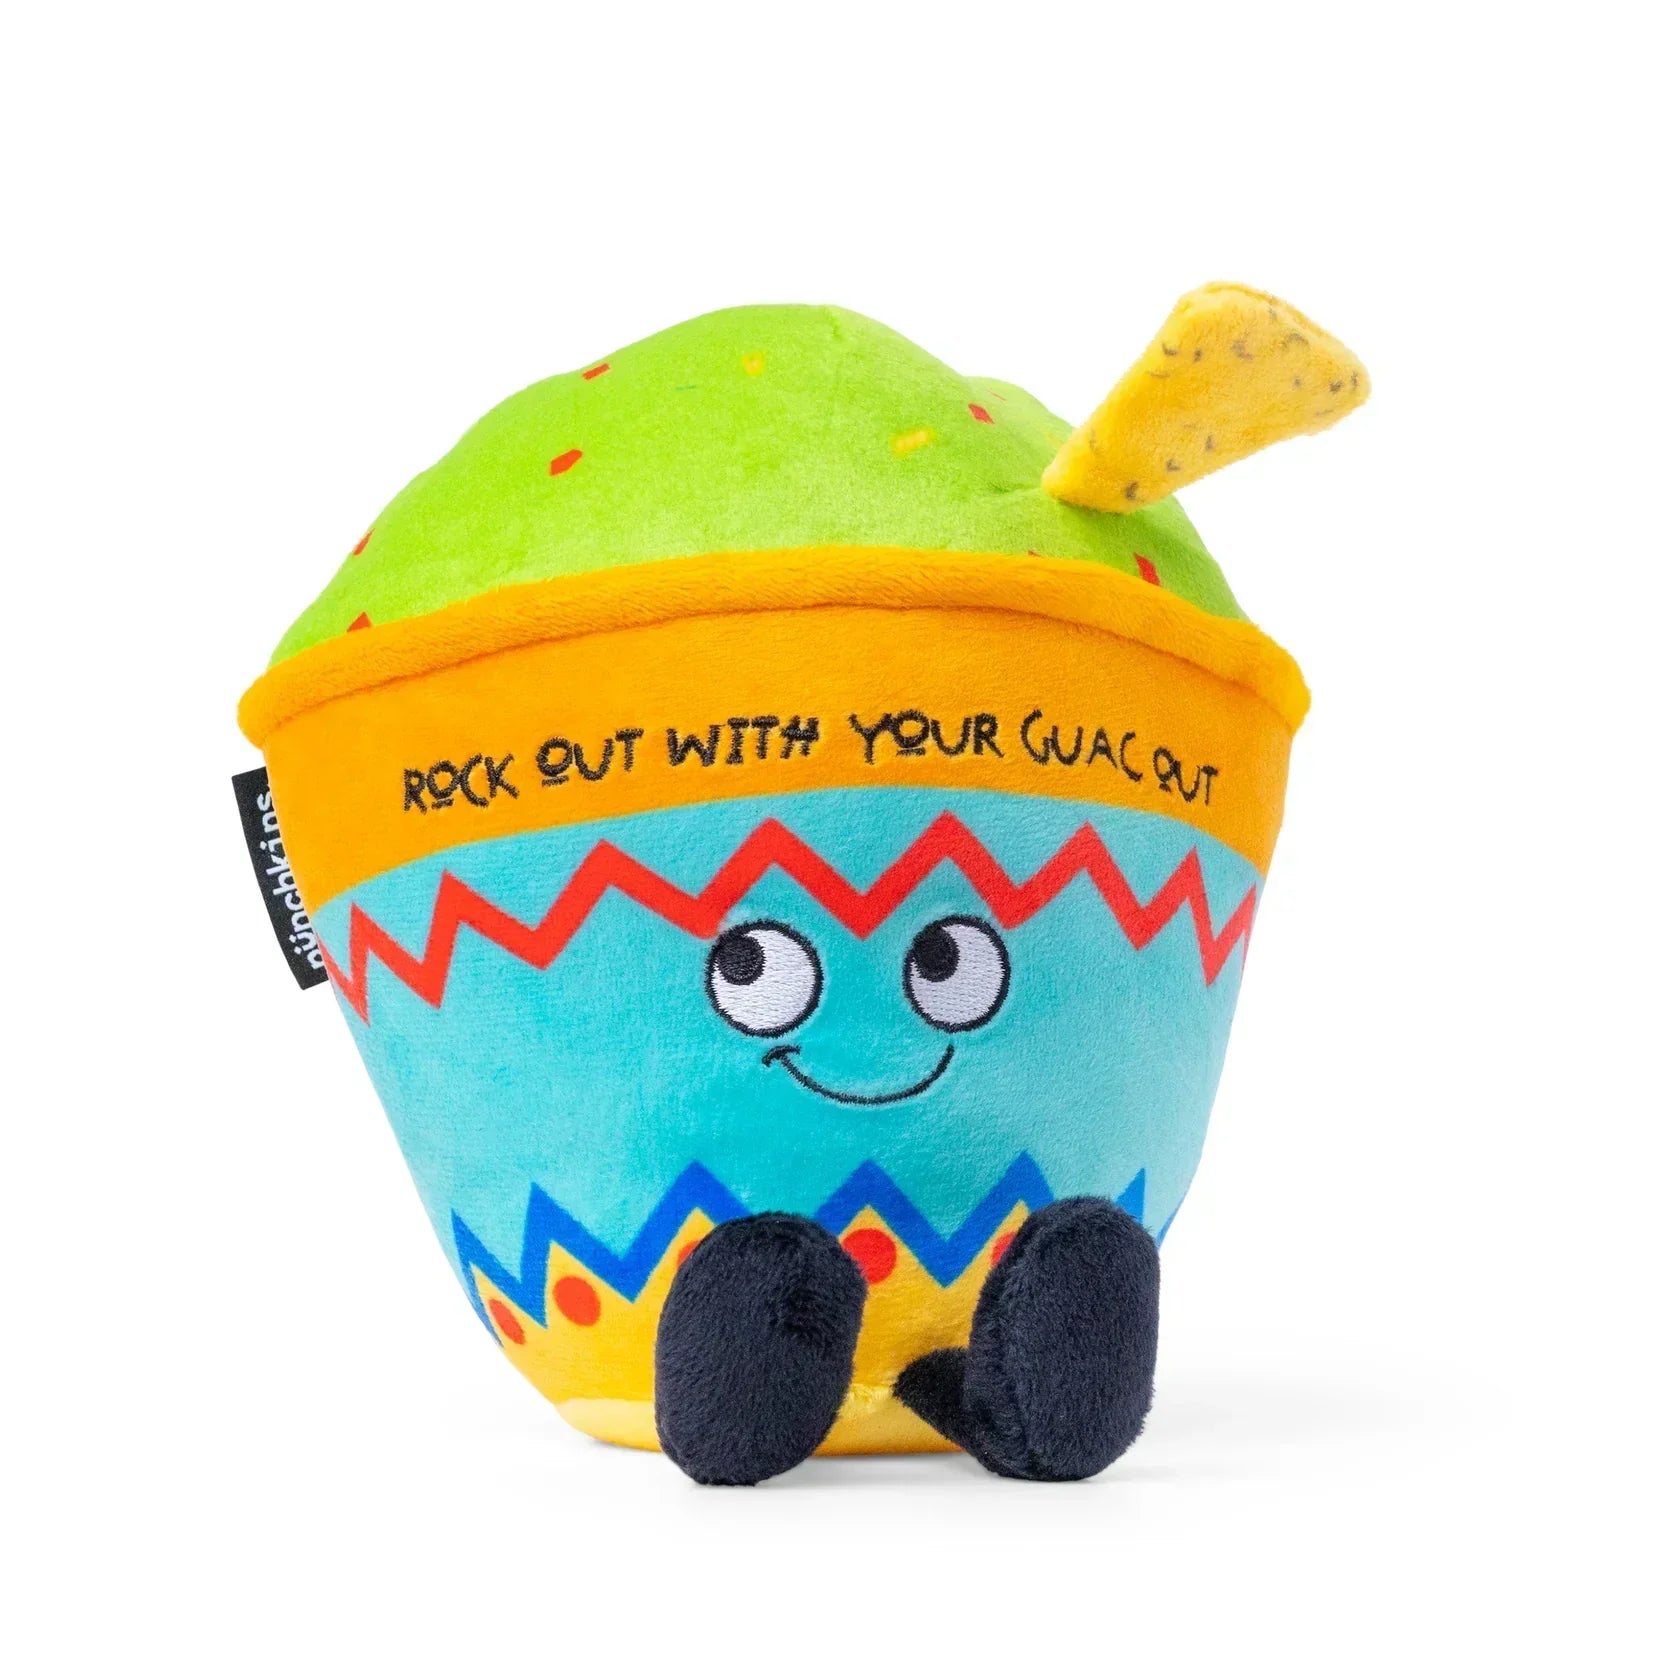 [PRE-ORDER] "Rock Out With Your Guac Out" Plush Guacamole The Plush Kingdom